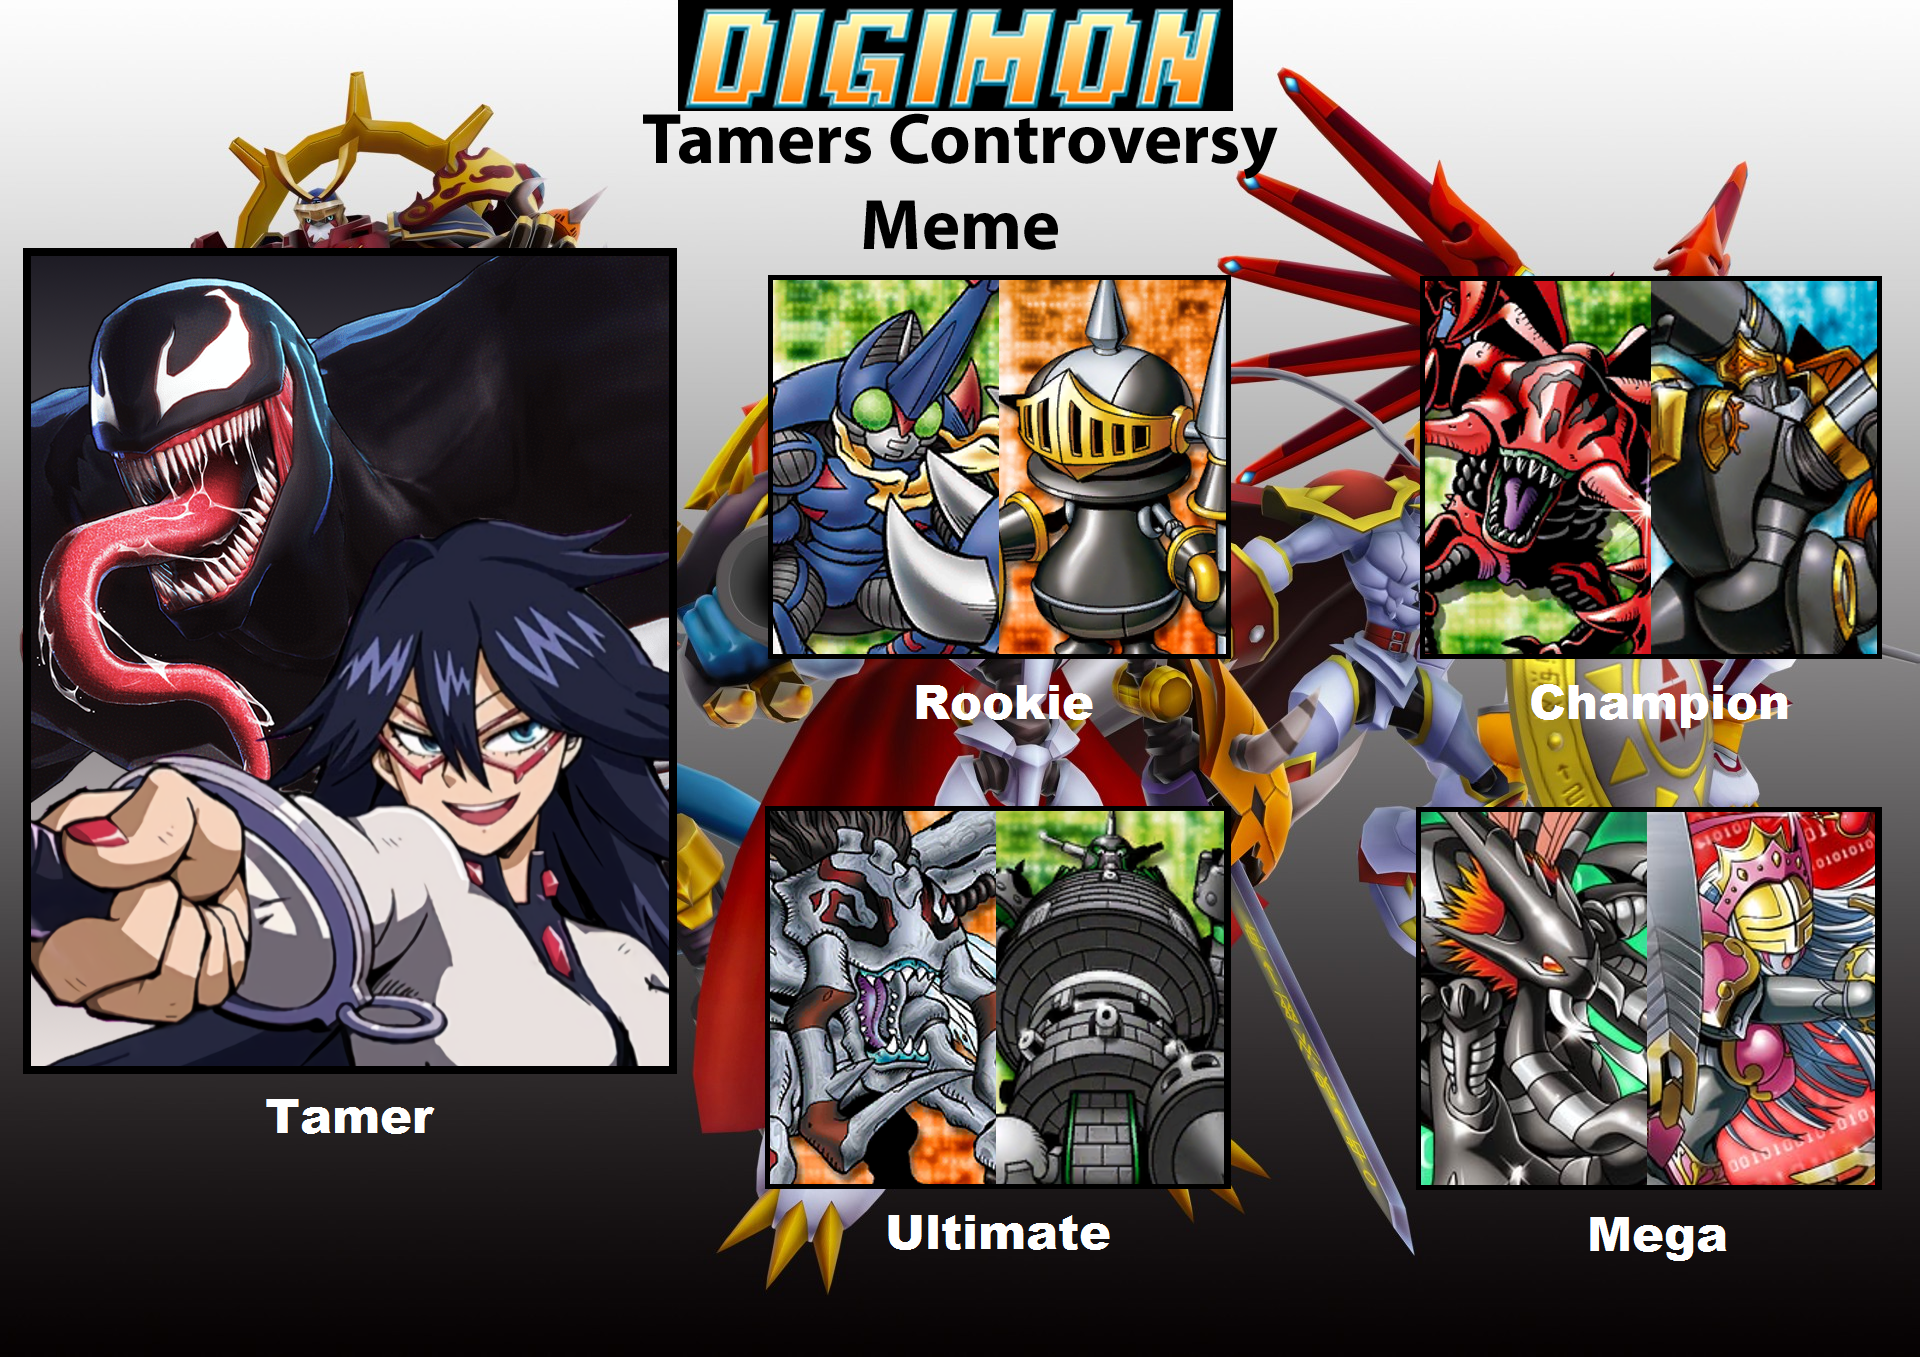 All-Star Heroes: Rookie Digimon by cpeters1 on DeviantArt